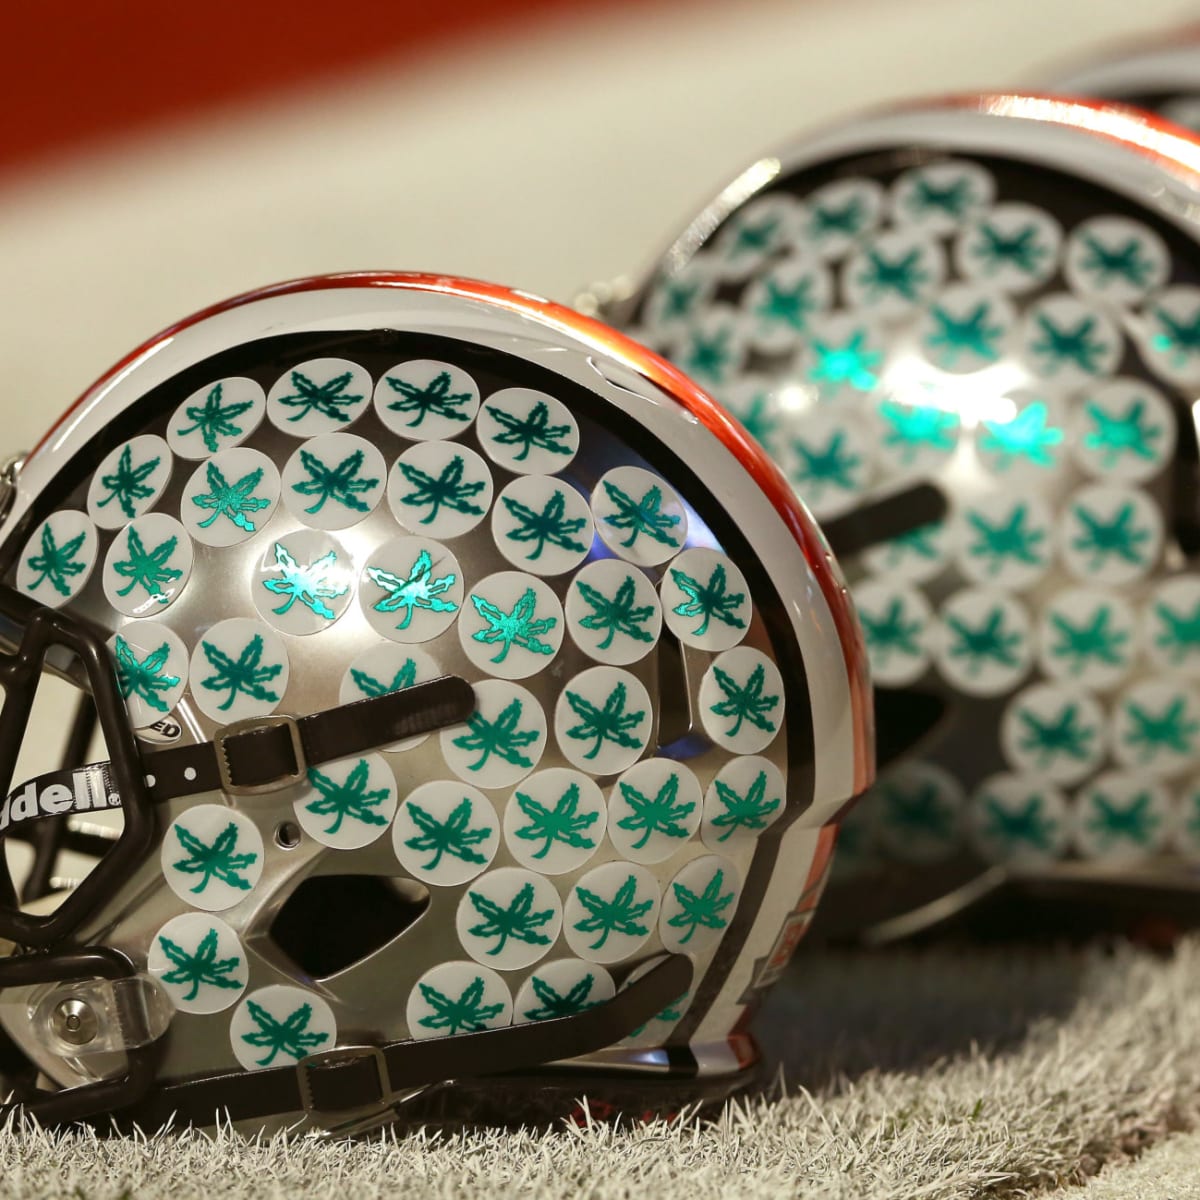 How helmet decals tell the story of Michigan and Ohio State